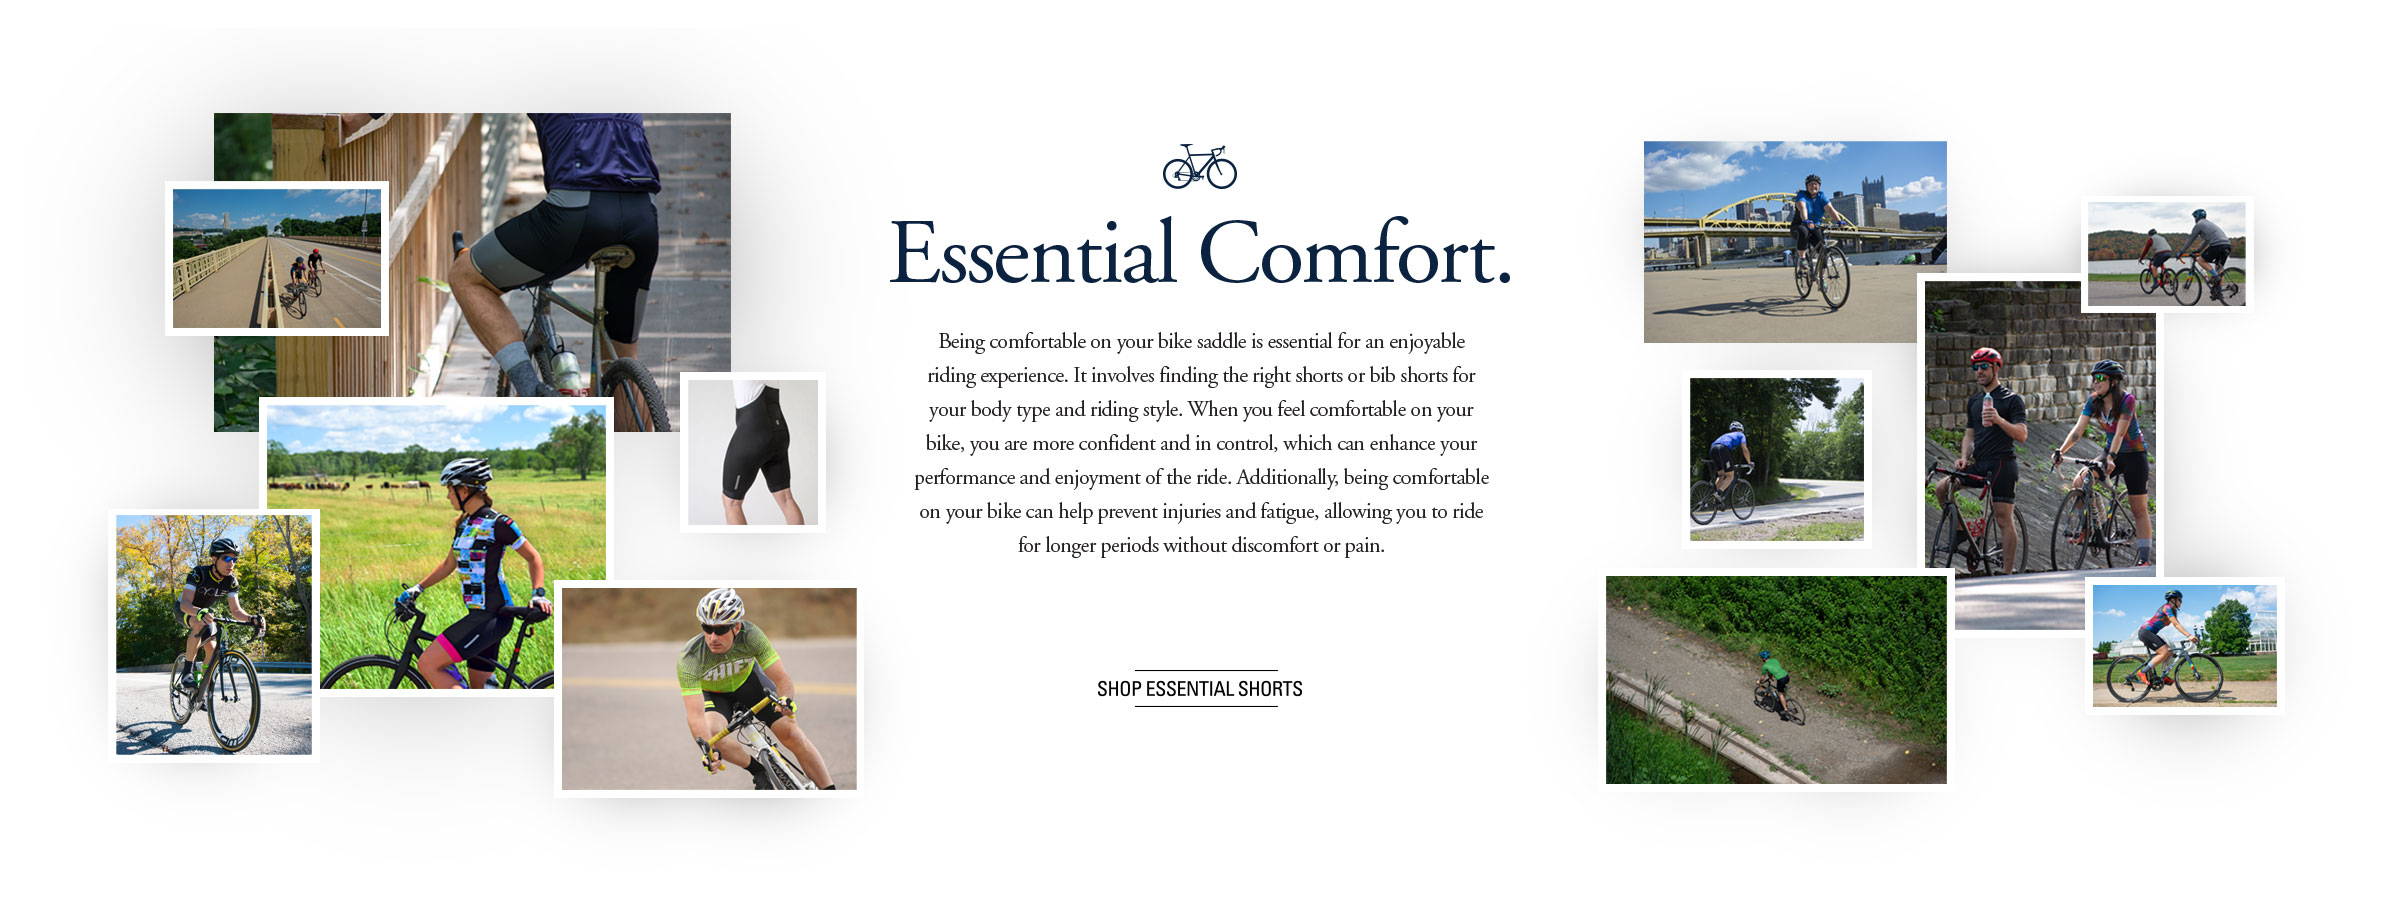 Essential comfort for cycling